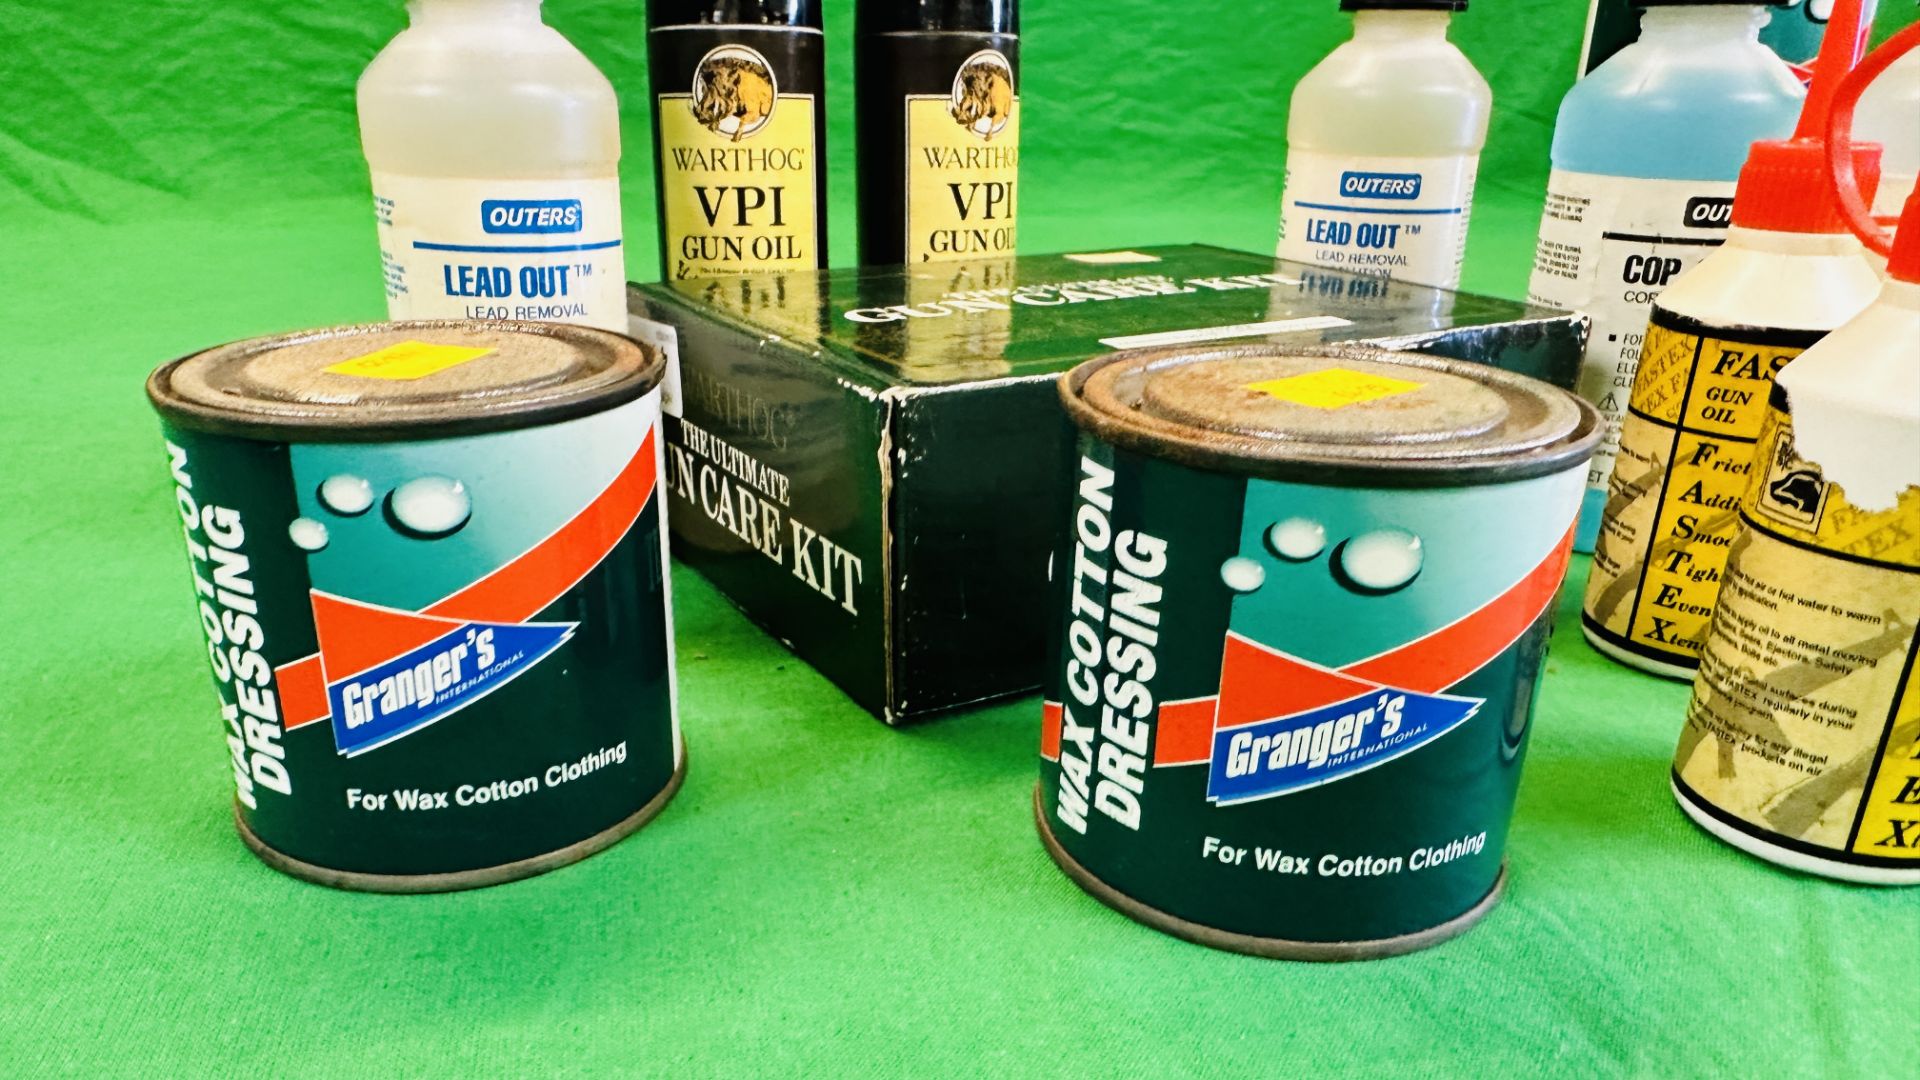 14 VARIOUS GUN CLEANING PRODUCTS TO INCLUDE 2 X WARTHOG UPI OIL, LEAD OUT LEAD REMOVAL SOLUTION, - Image 3 of 8